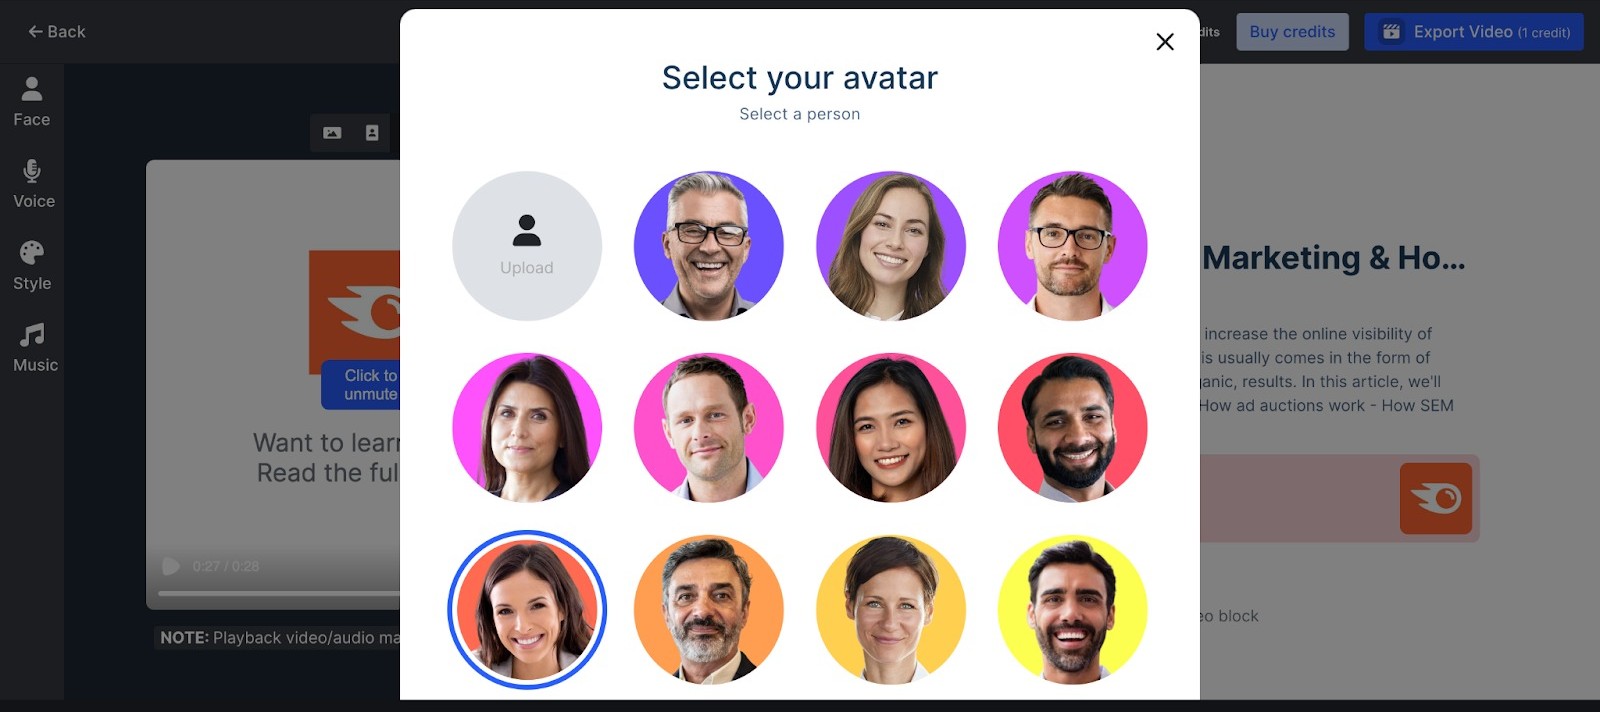 List of avatar image options, as well as the option to upload your own.